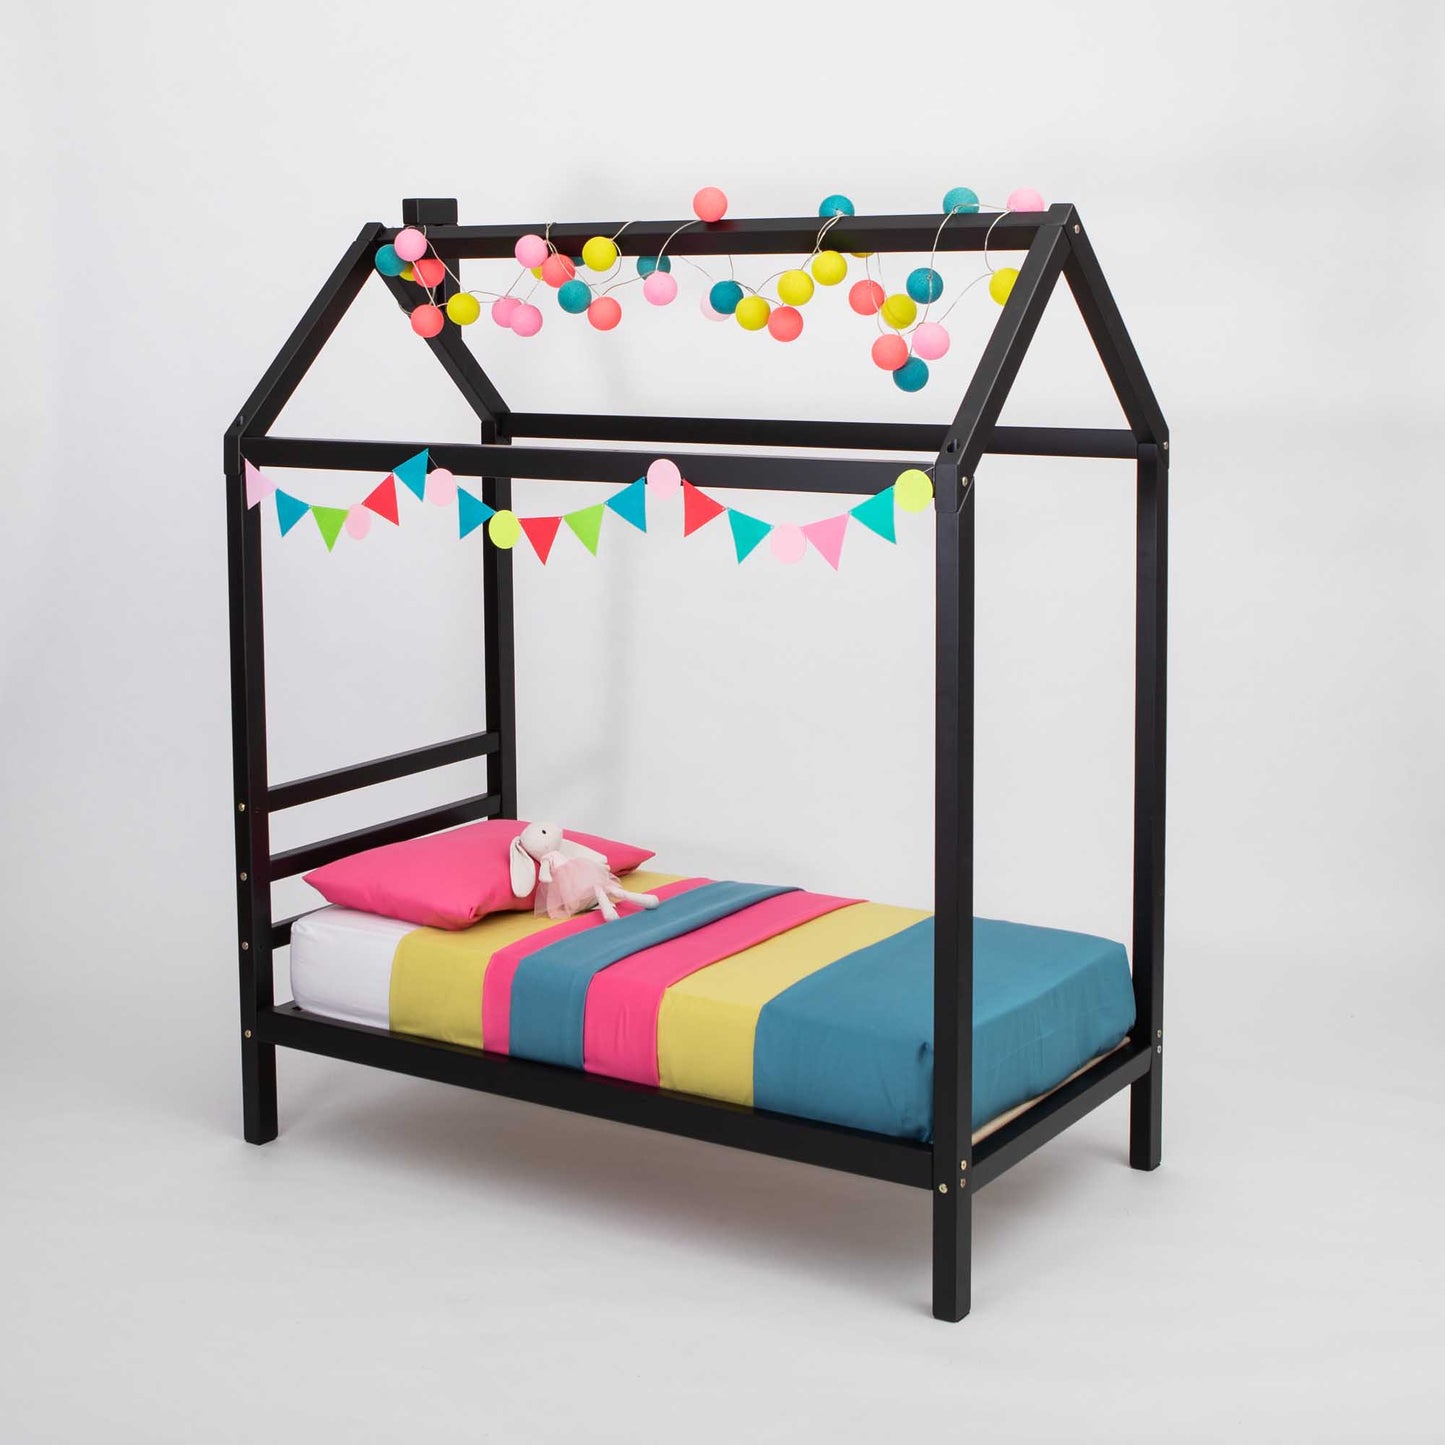 A Kids' house bed on legs with a headboard, with a black frame and colorful bedding, raised on legs like a house bed.